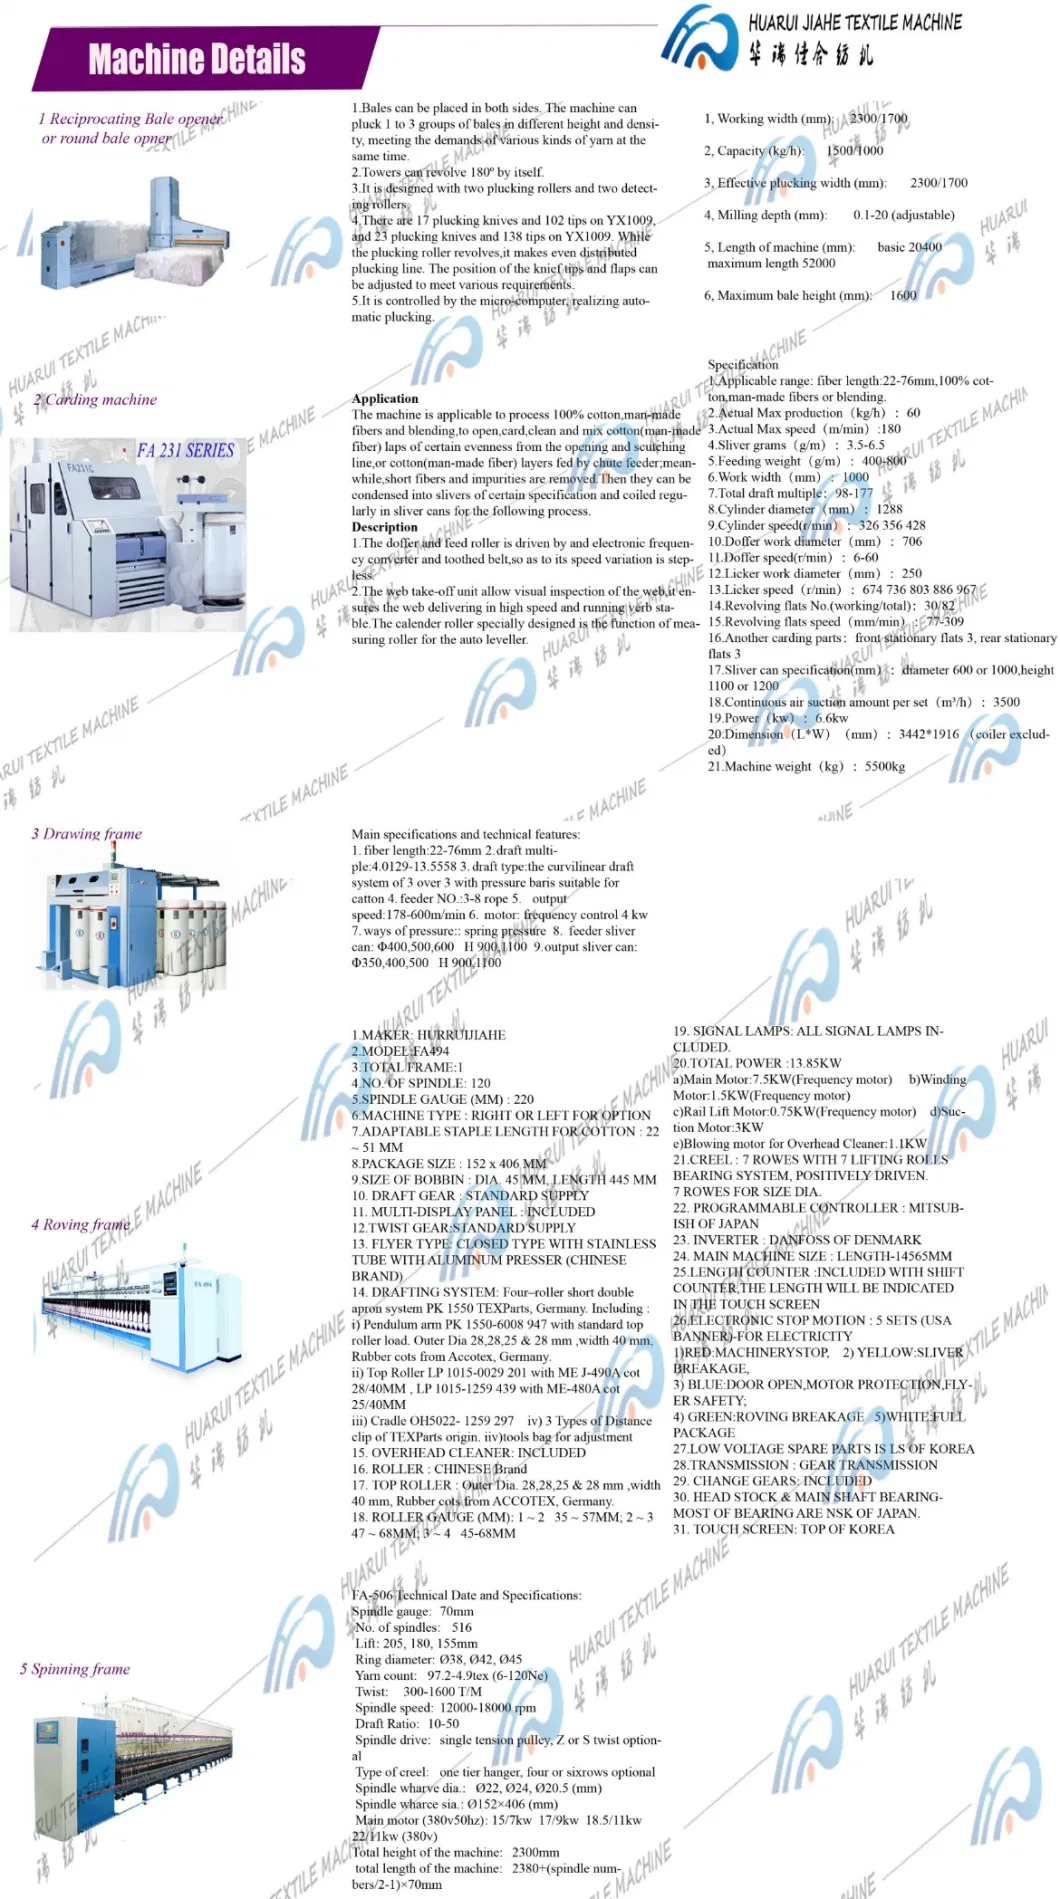 Textile Package Dryers Cheese Yarn Dryer, Textile Machines